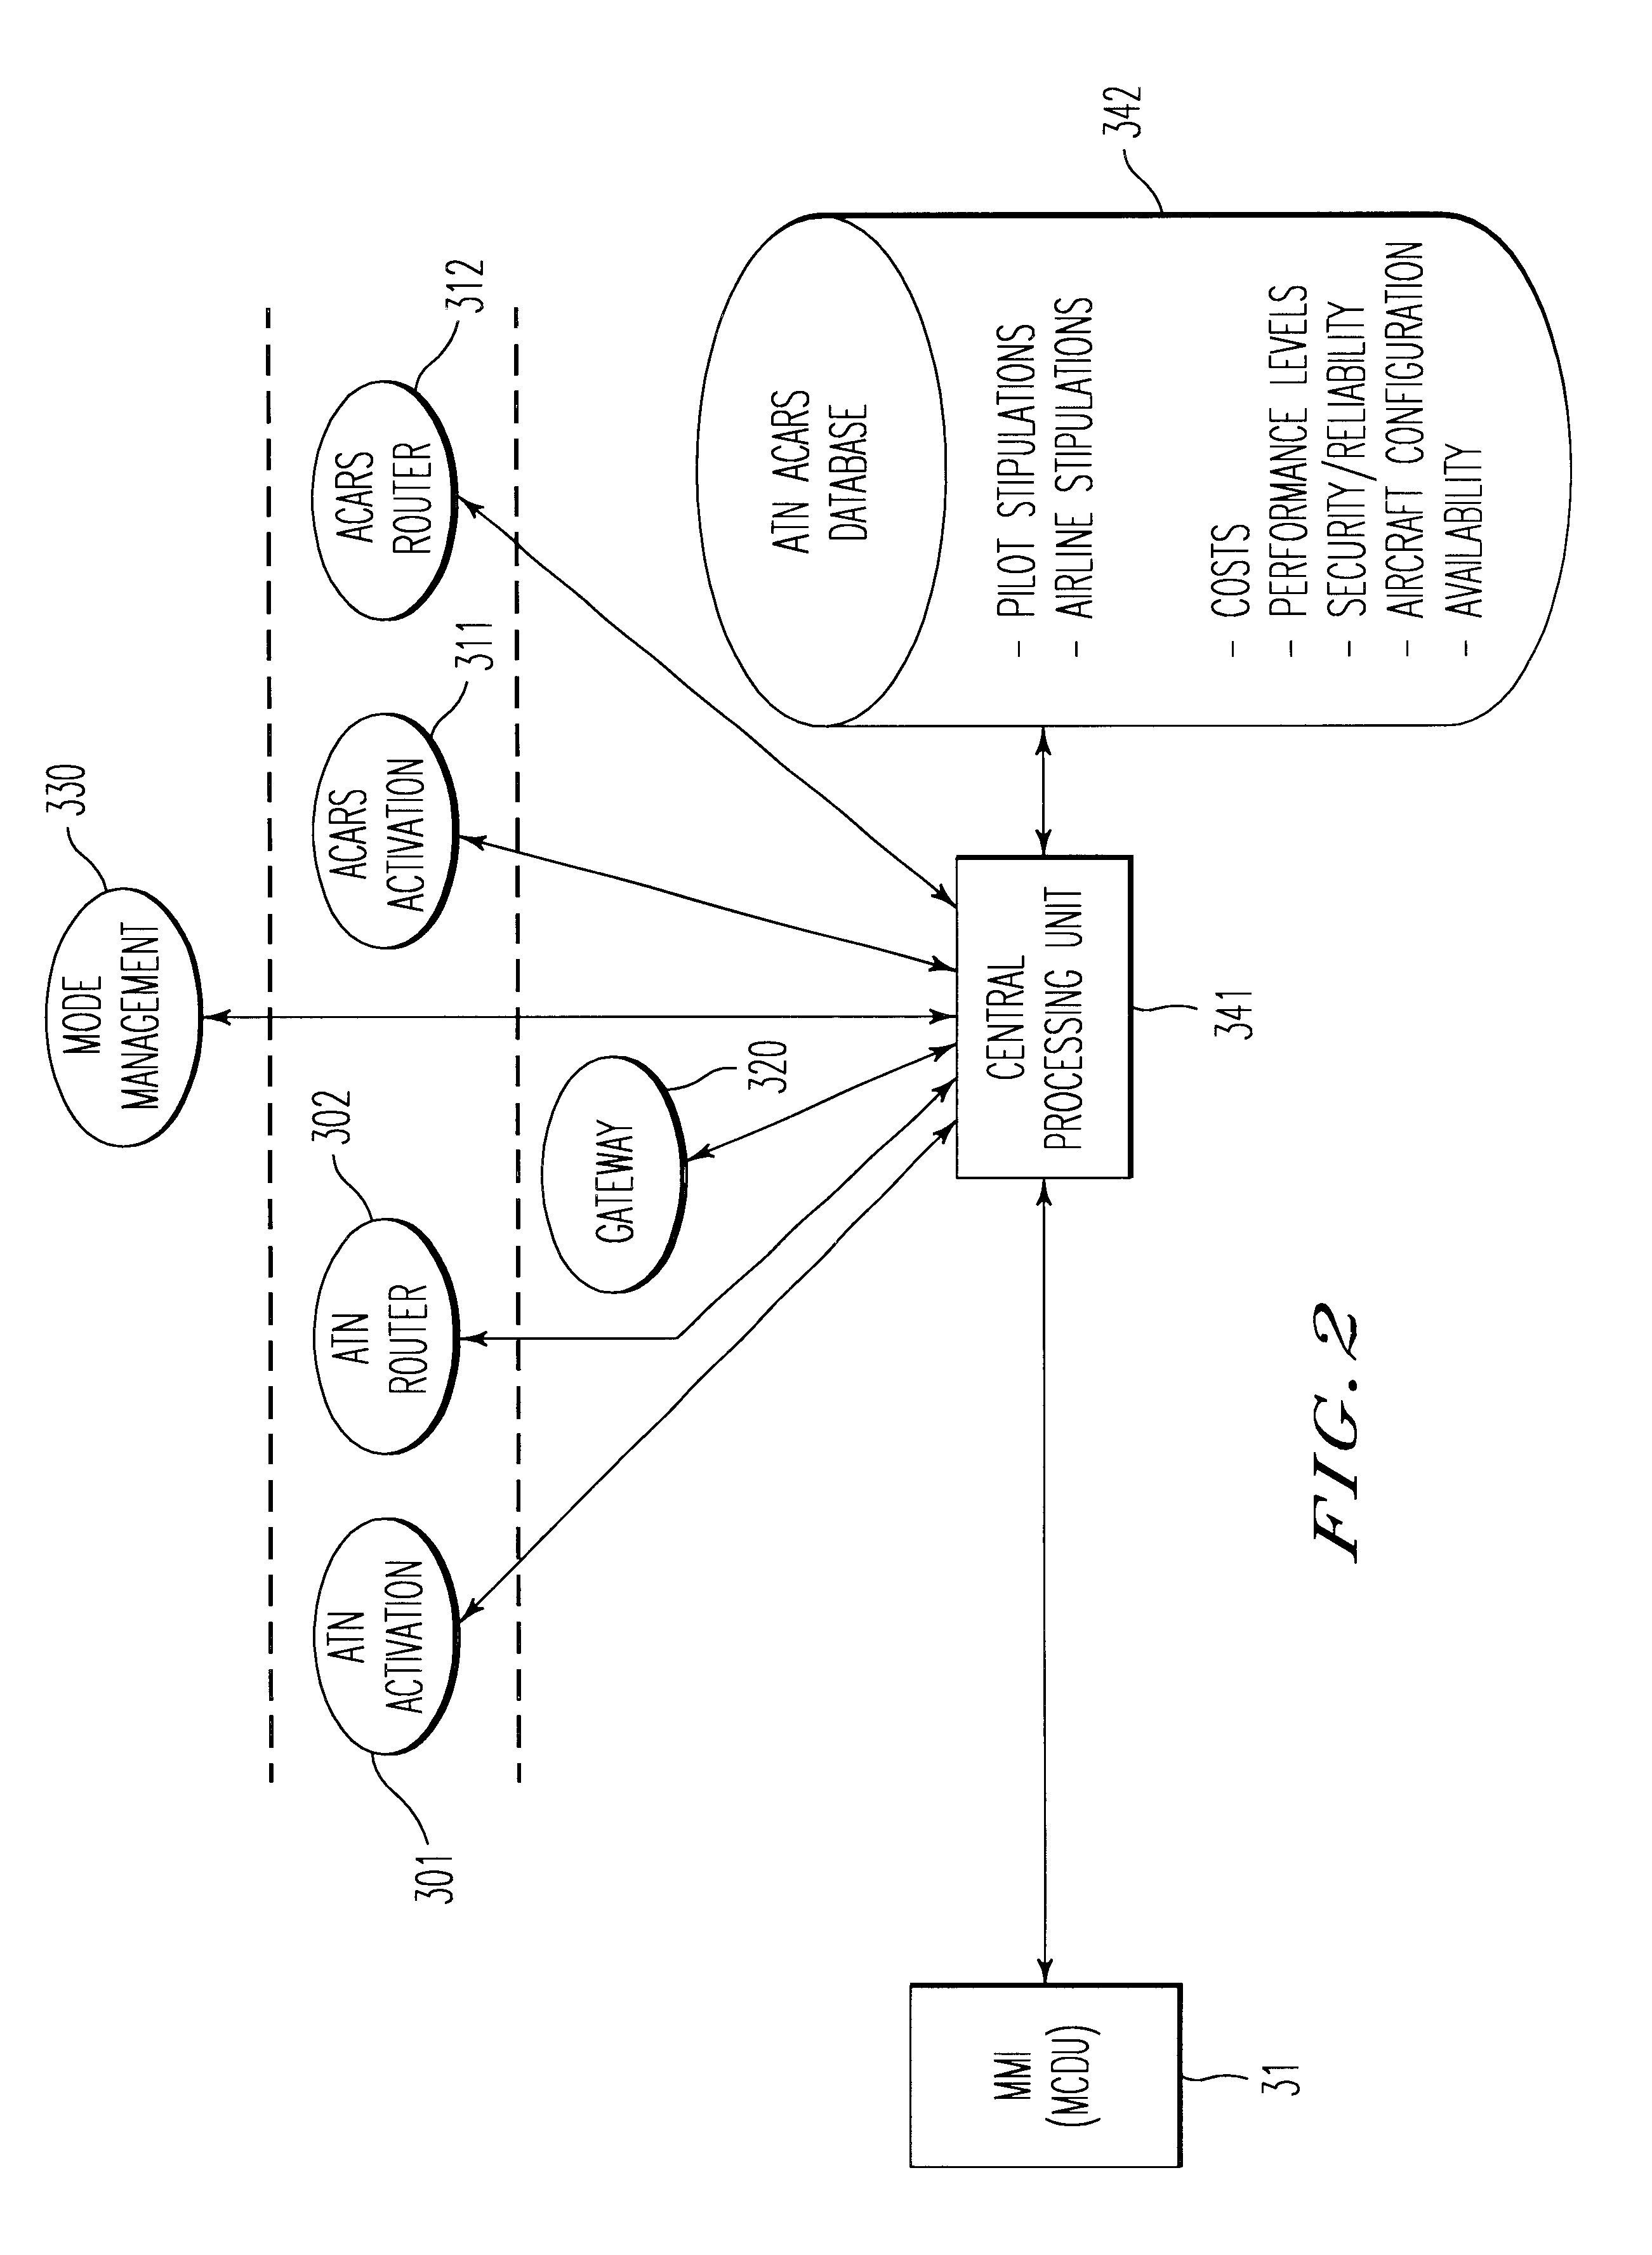 Method for managing communication modes for an aircraft